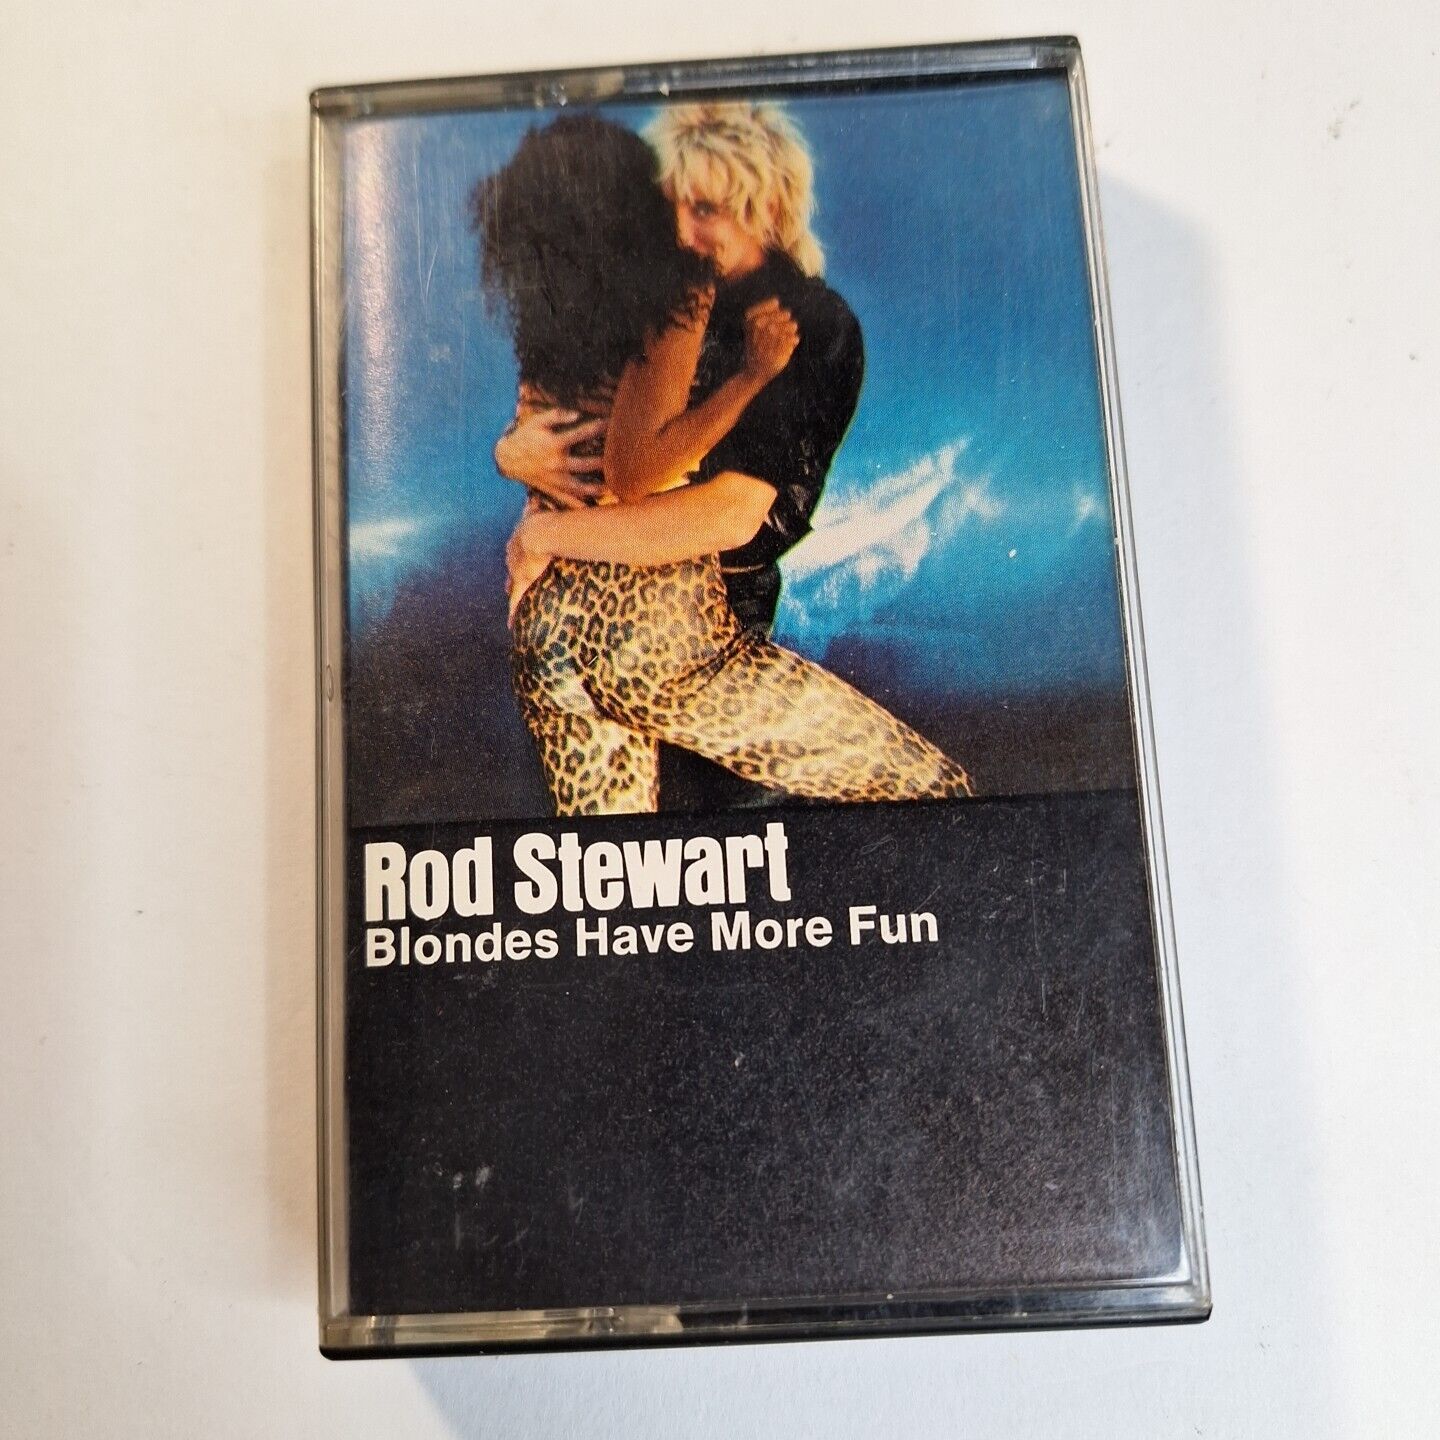 Rod Stewart Blondes Have More Fun Cassette Tape Small Faces Rock Pop - TESTED